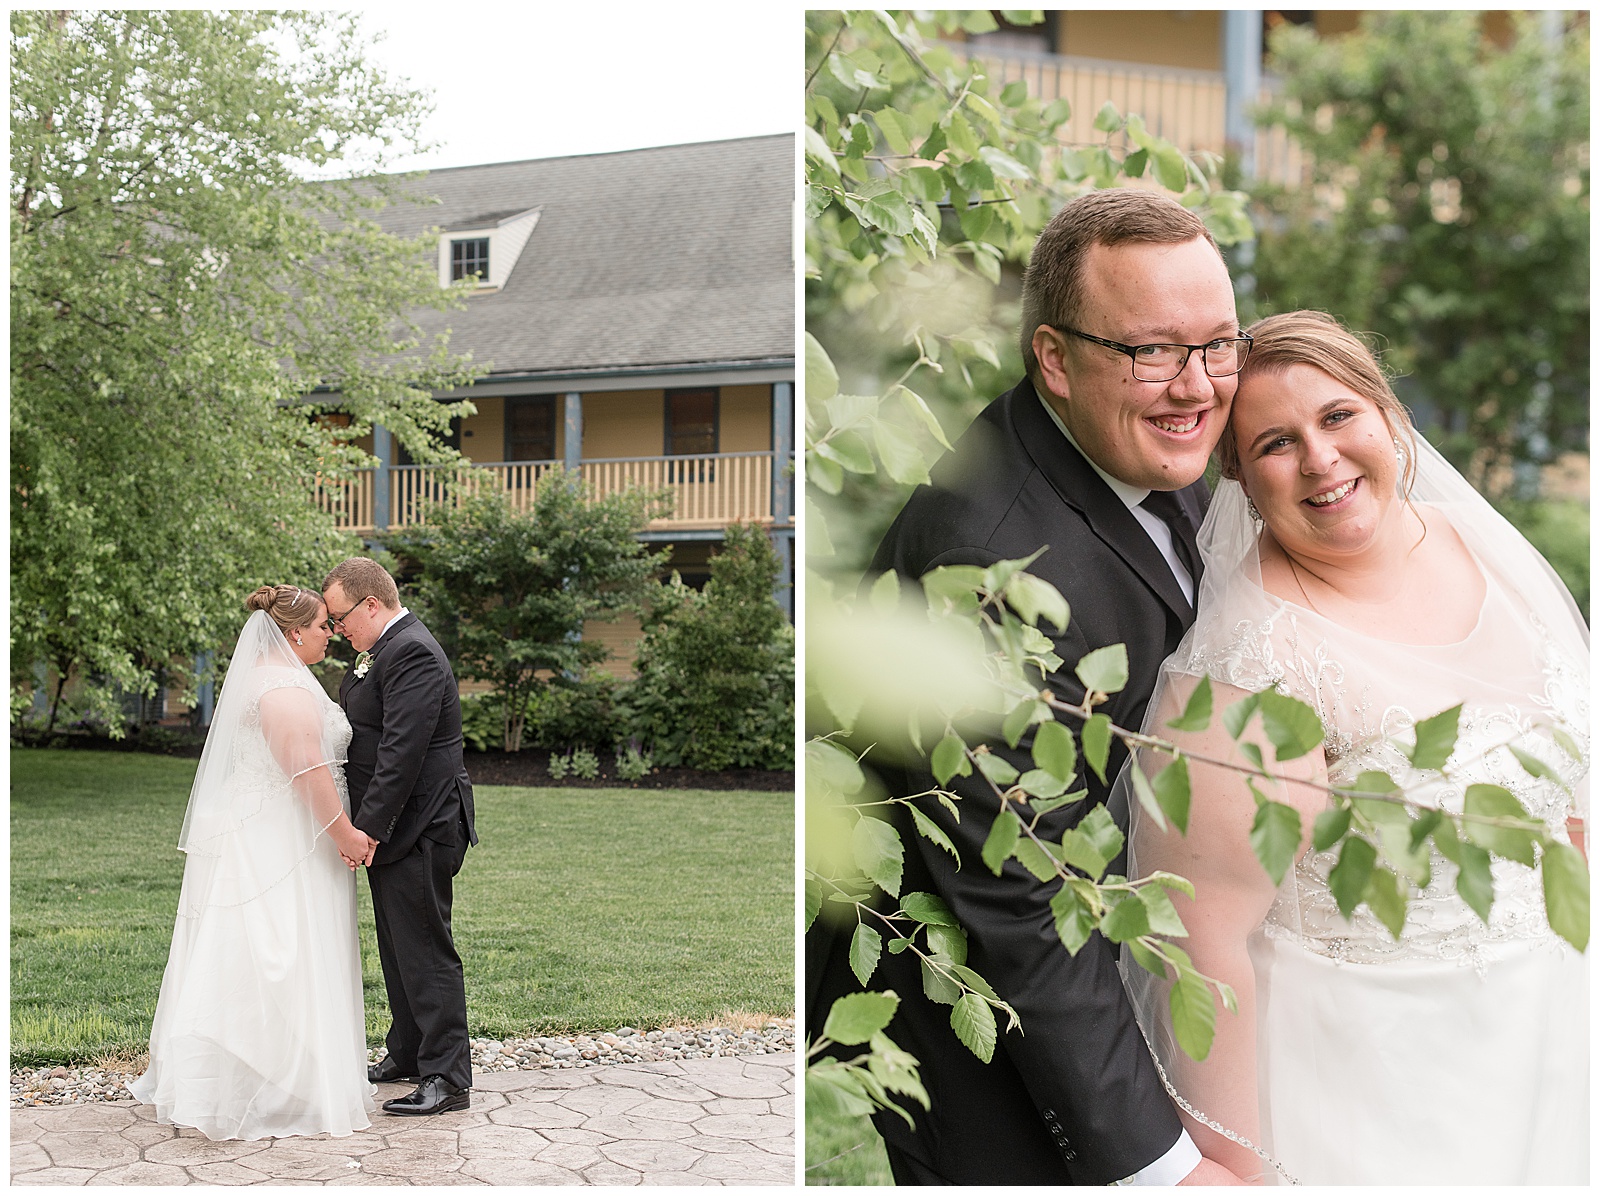 groom stands behind bride as they both smile at camera behind willow tree branches on sunny wedding day